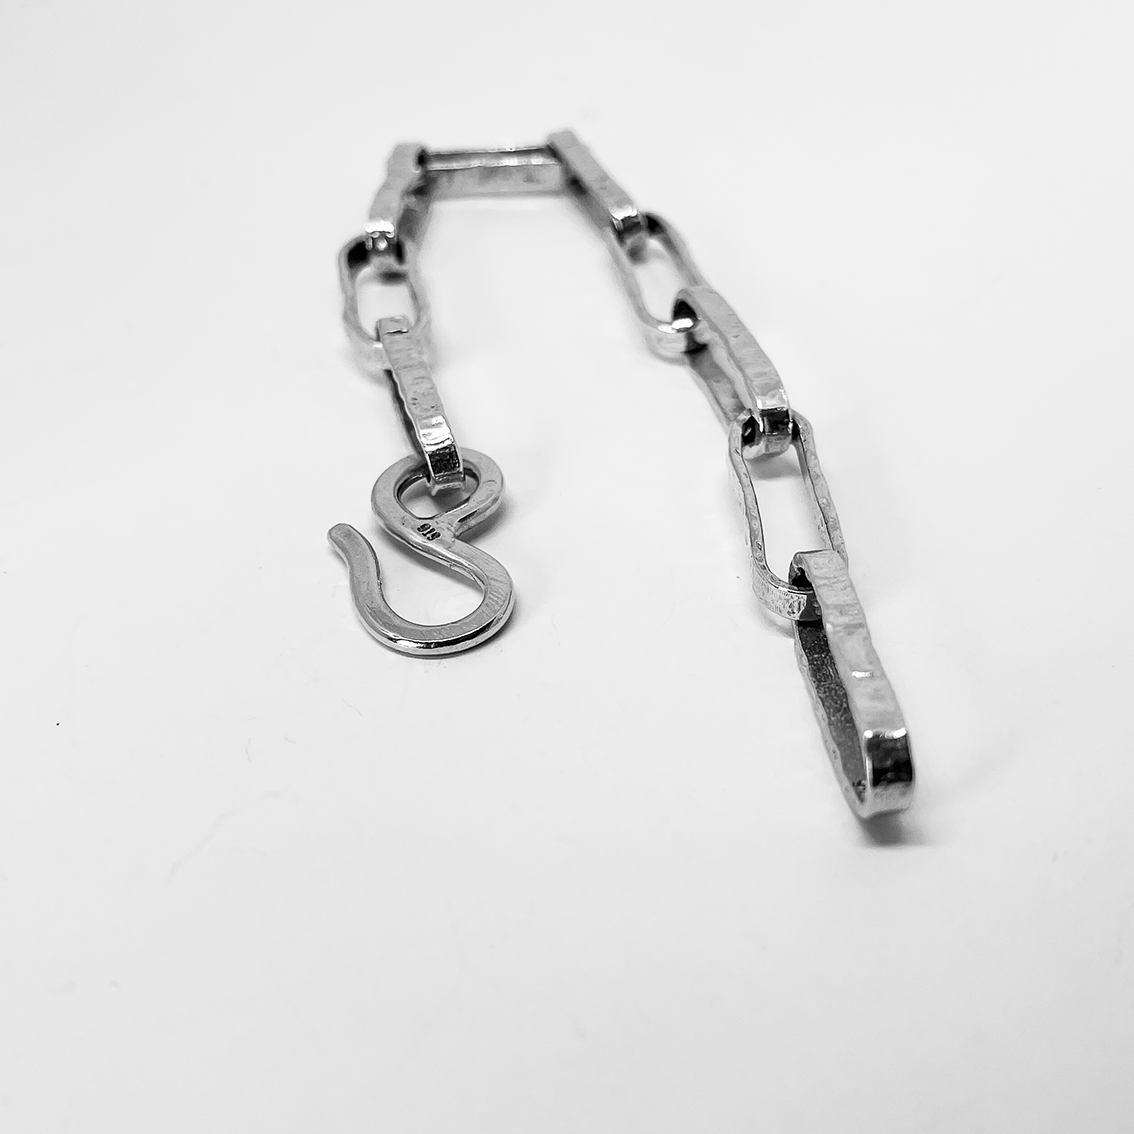 Image showing the links of the Oval Link Chain Bracelet